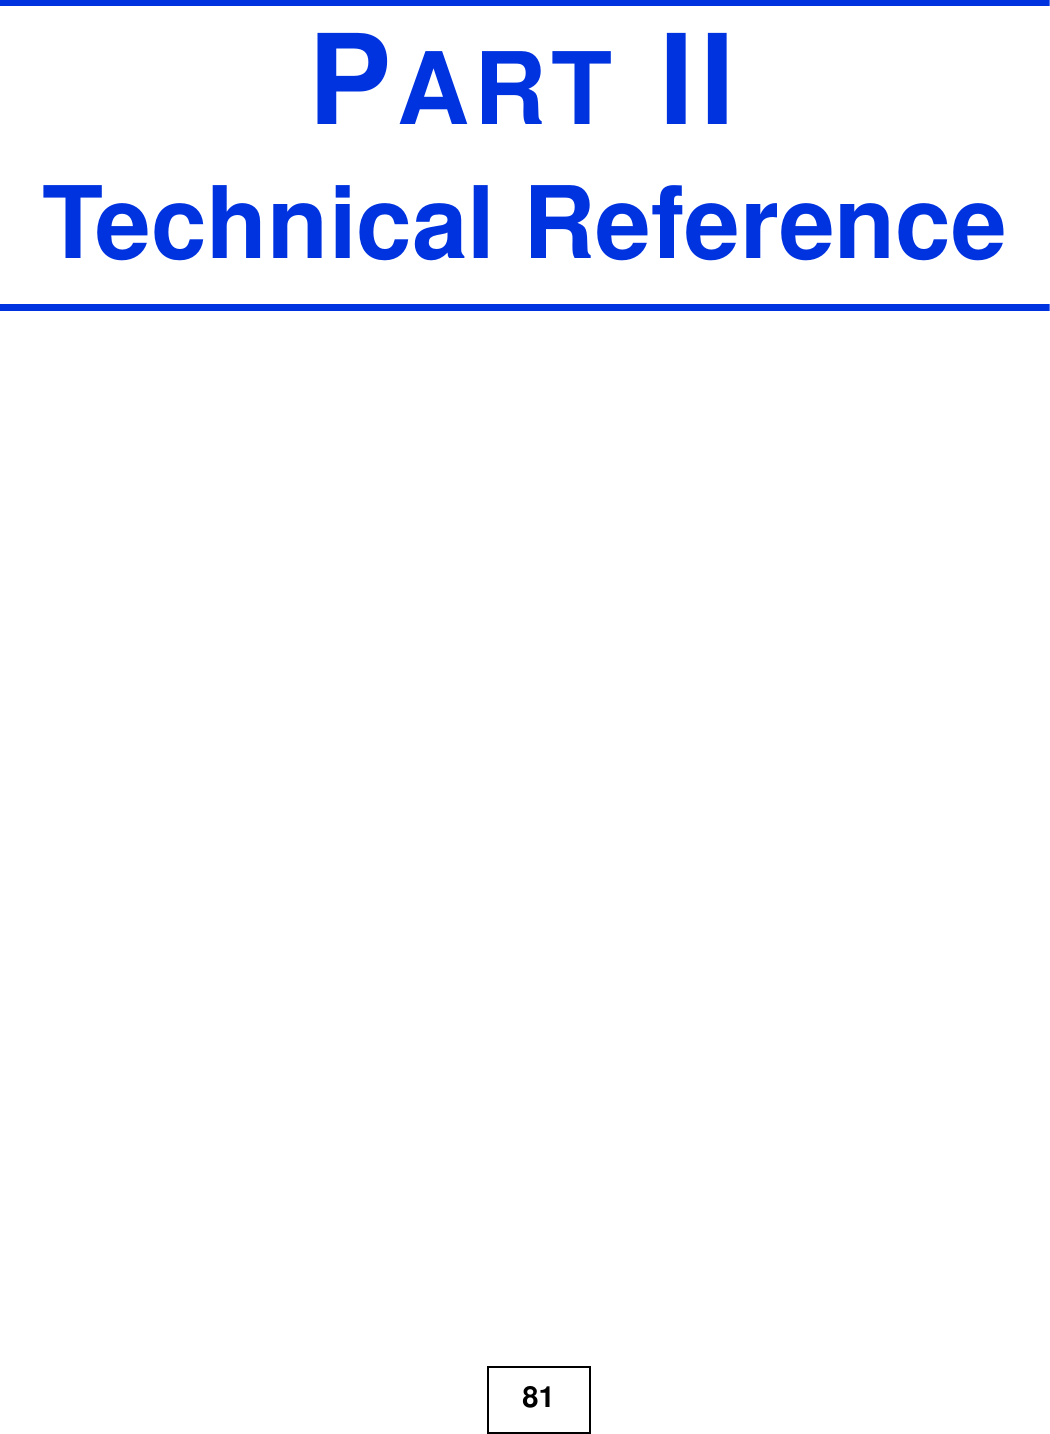 81PART IITechnical Reference